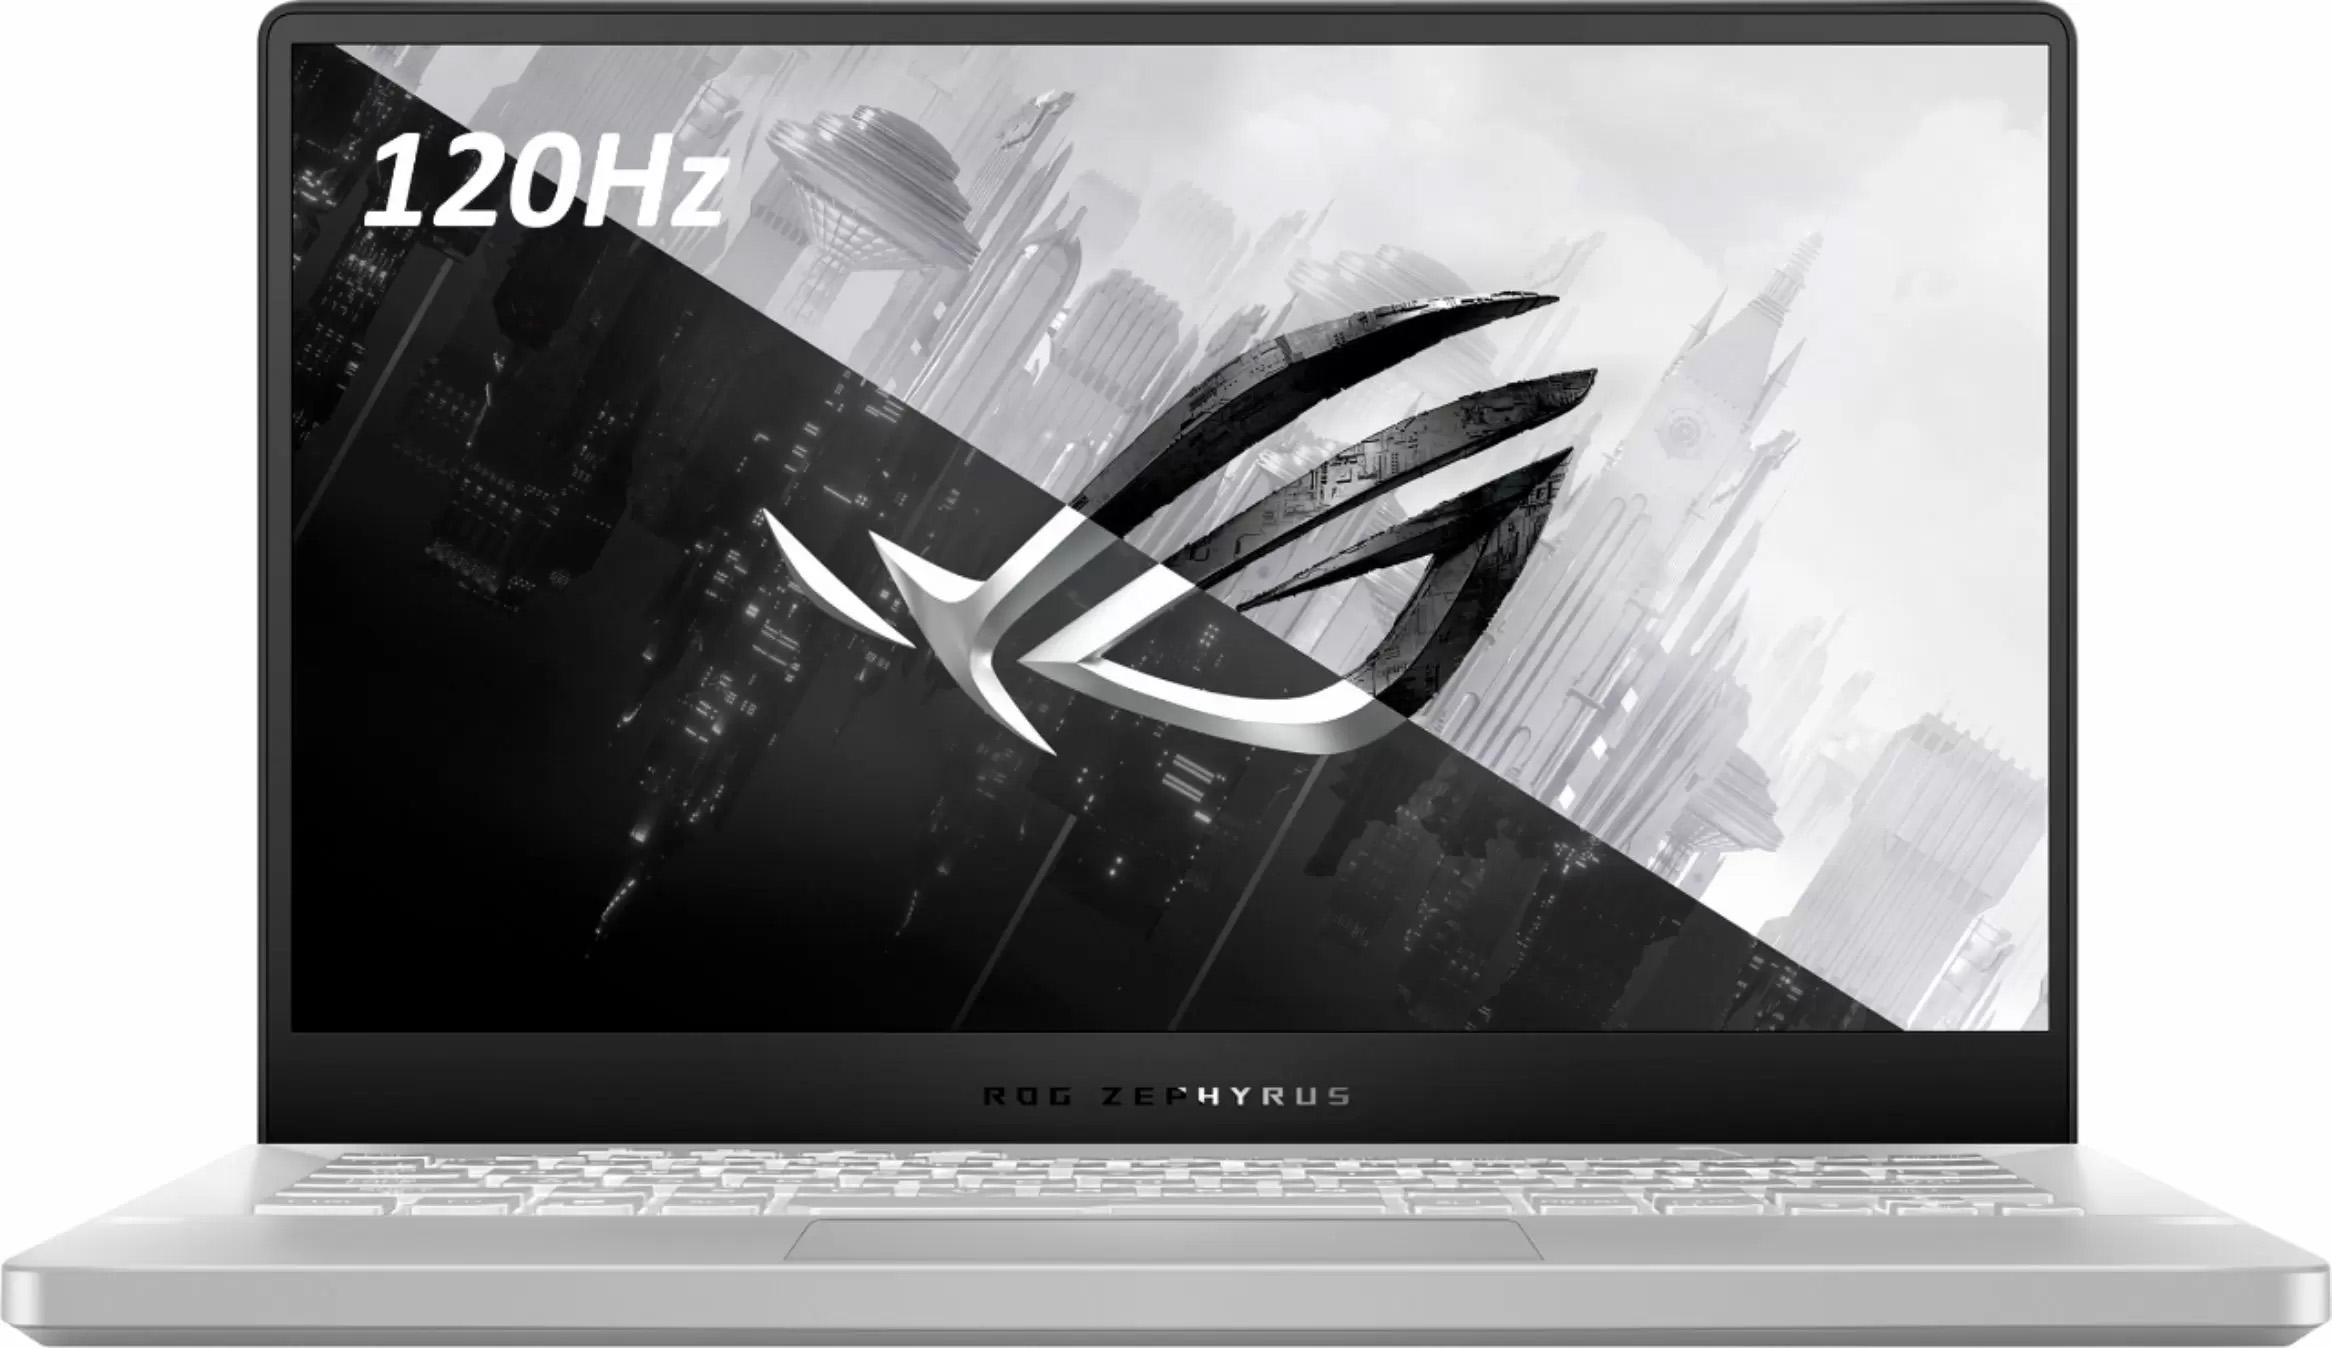 Asus ROG Zephyrus G14 Ryzen 9 16GB Gaming Notebook Laptop for $1199.99 Shipped